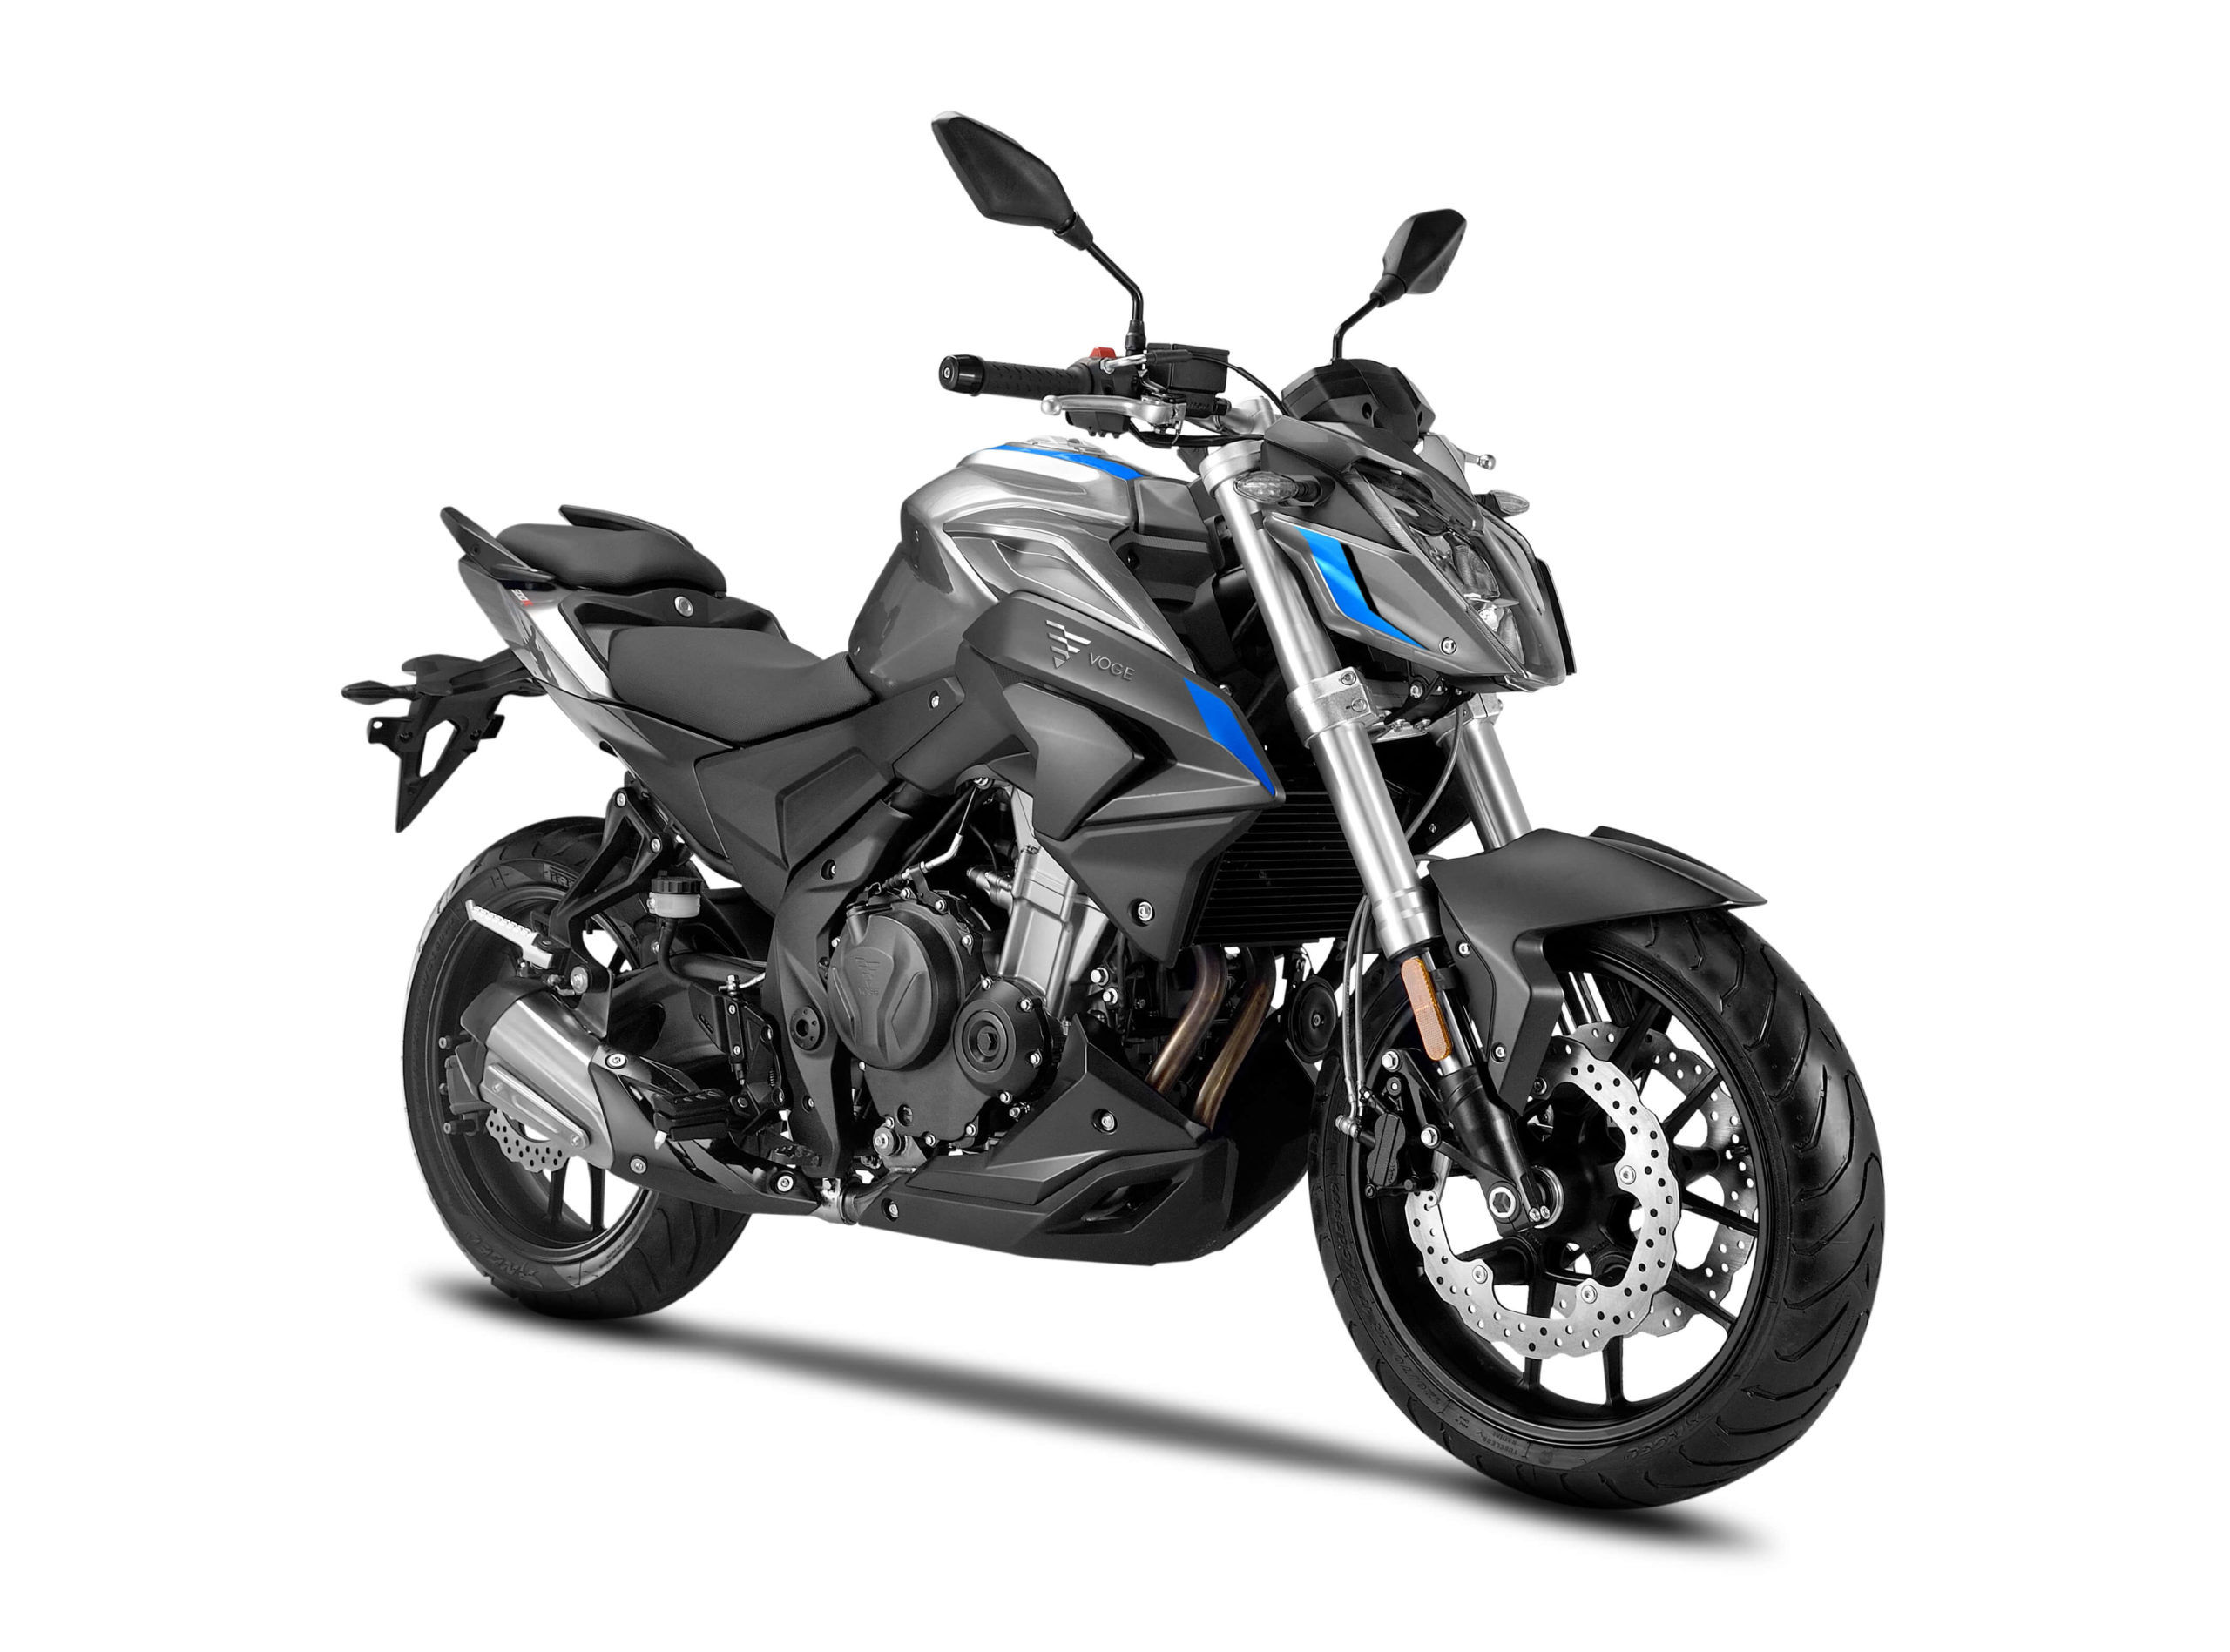 Voge Brivido 500R Naked Motorcycle Launched in Italy - ZigWheels